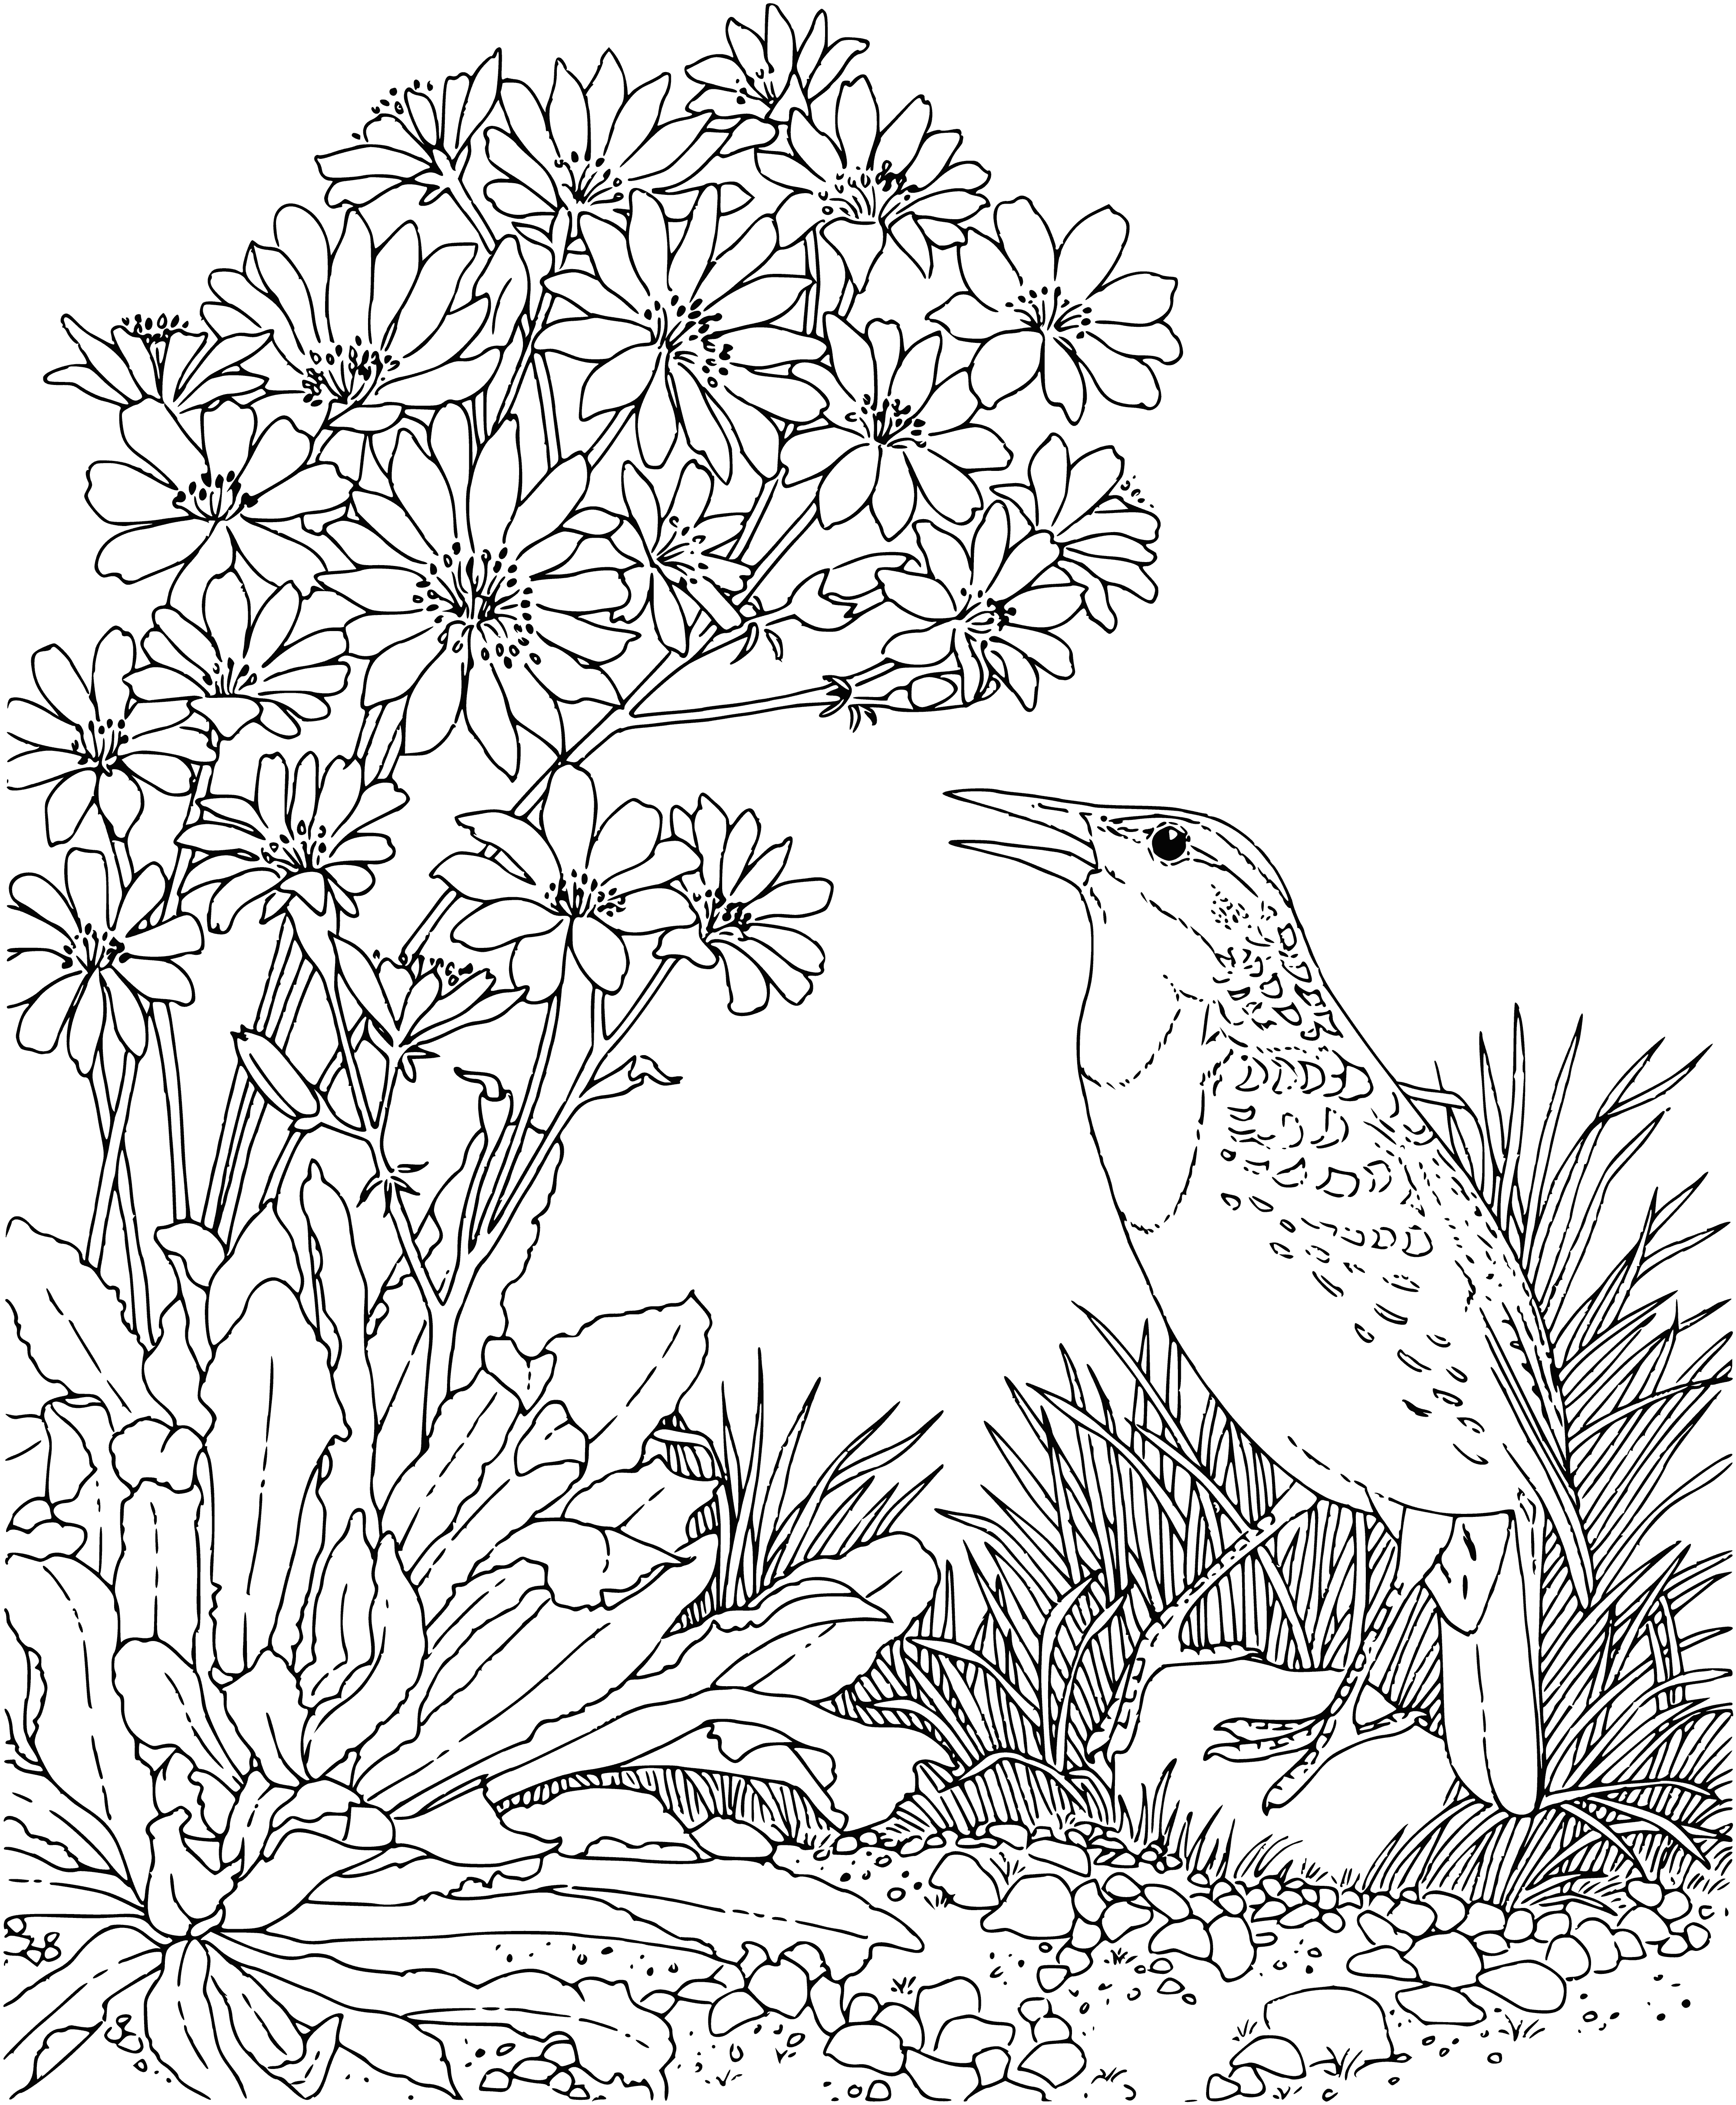 Meadow lark coloring page